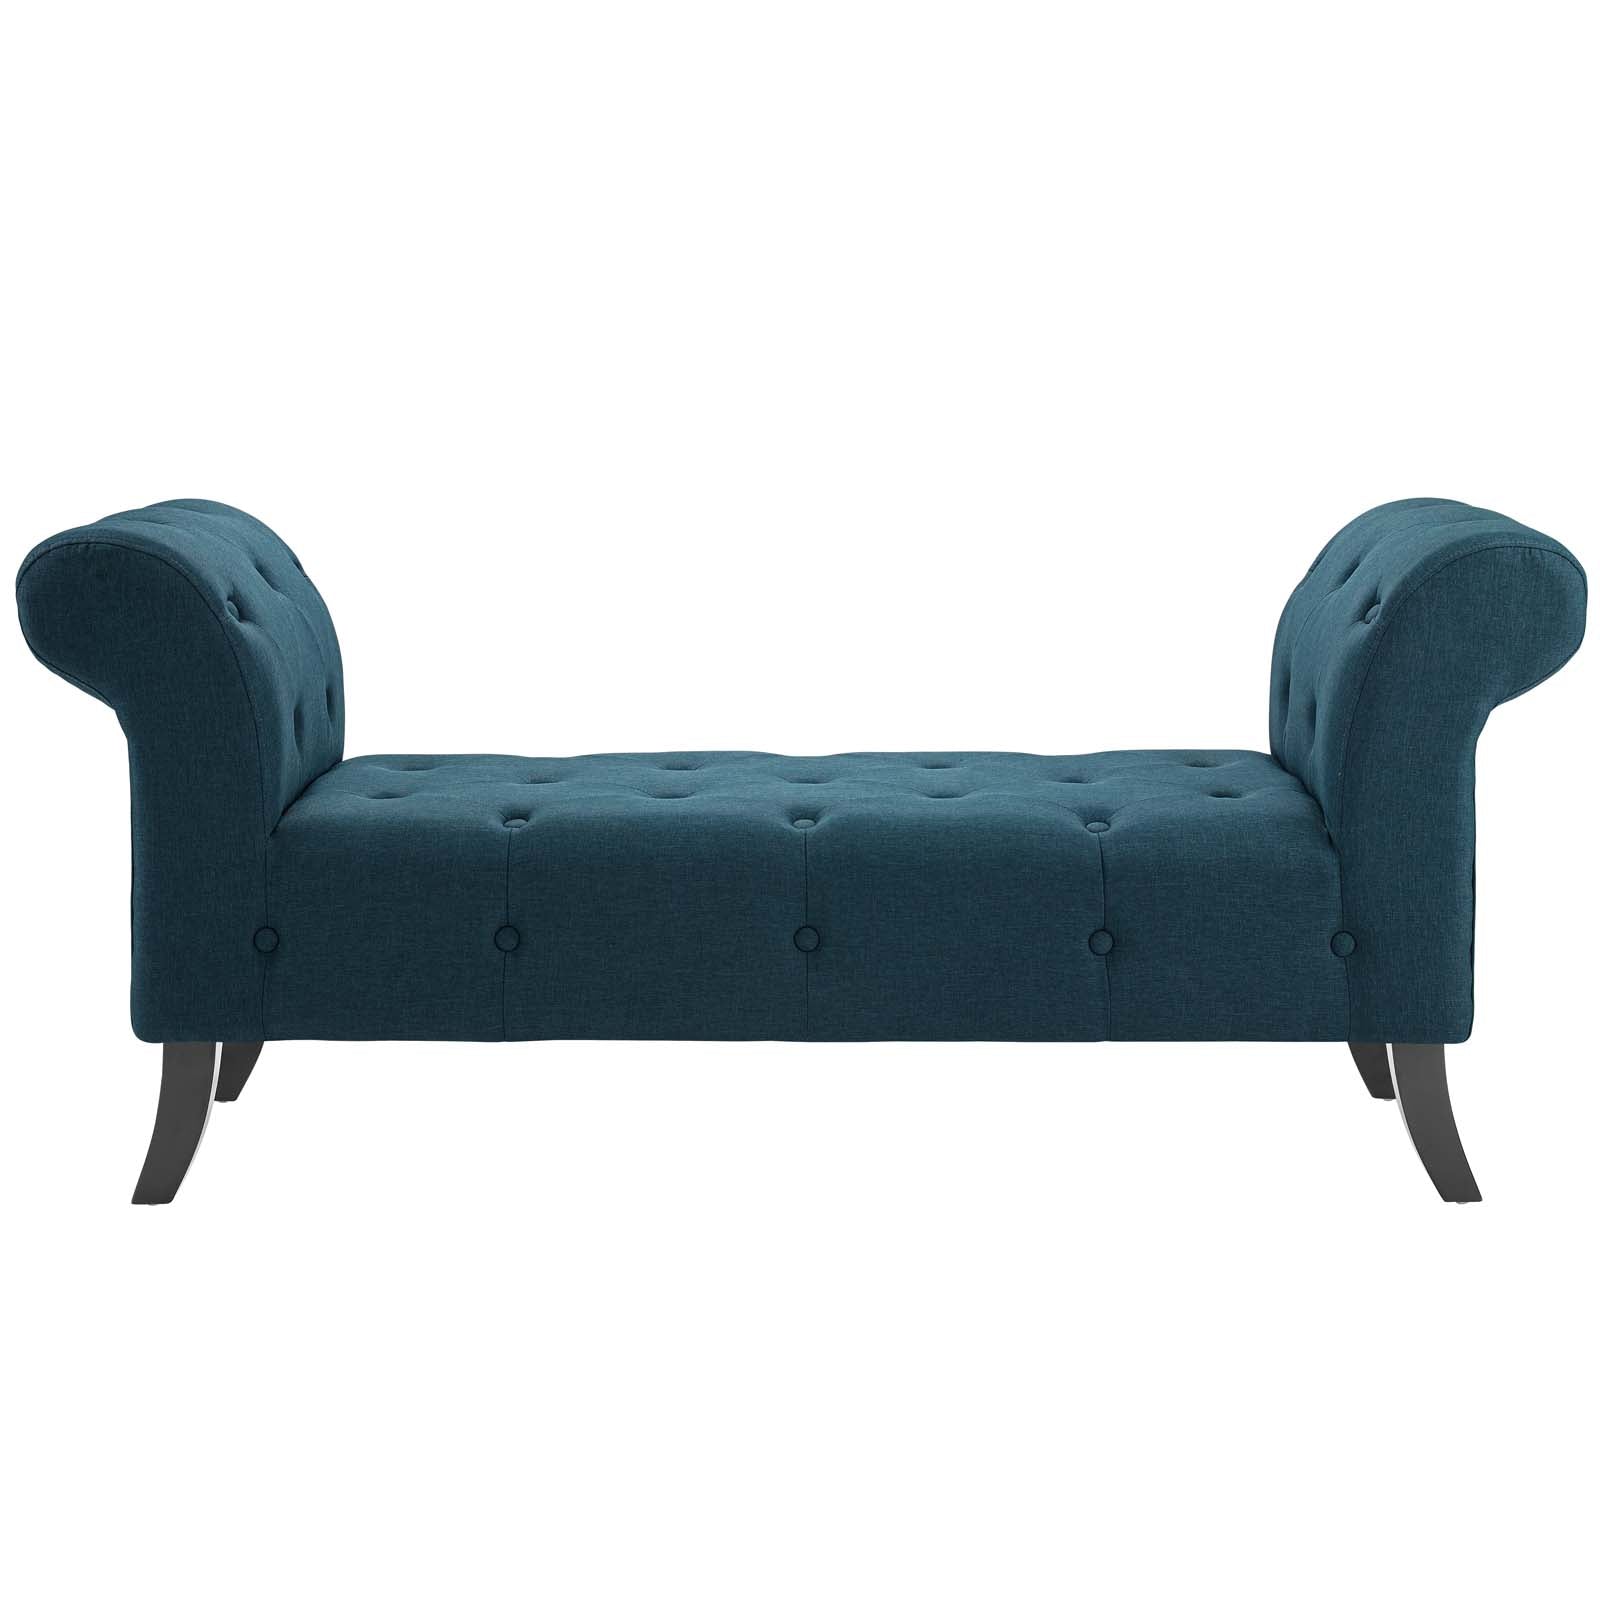 Evince Button Tufted Accent Upholstered Fabric Bench - East Shore Modern Home Furnishings